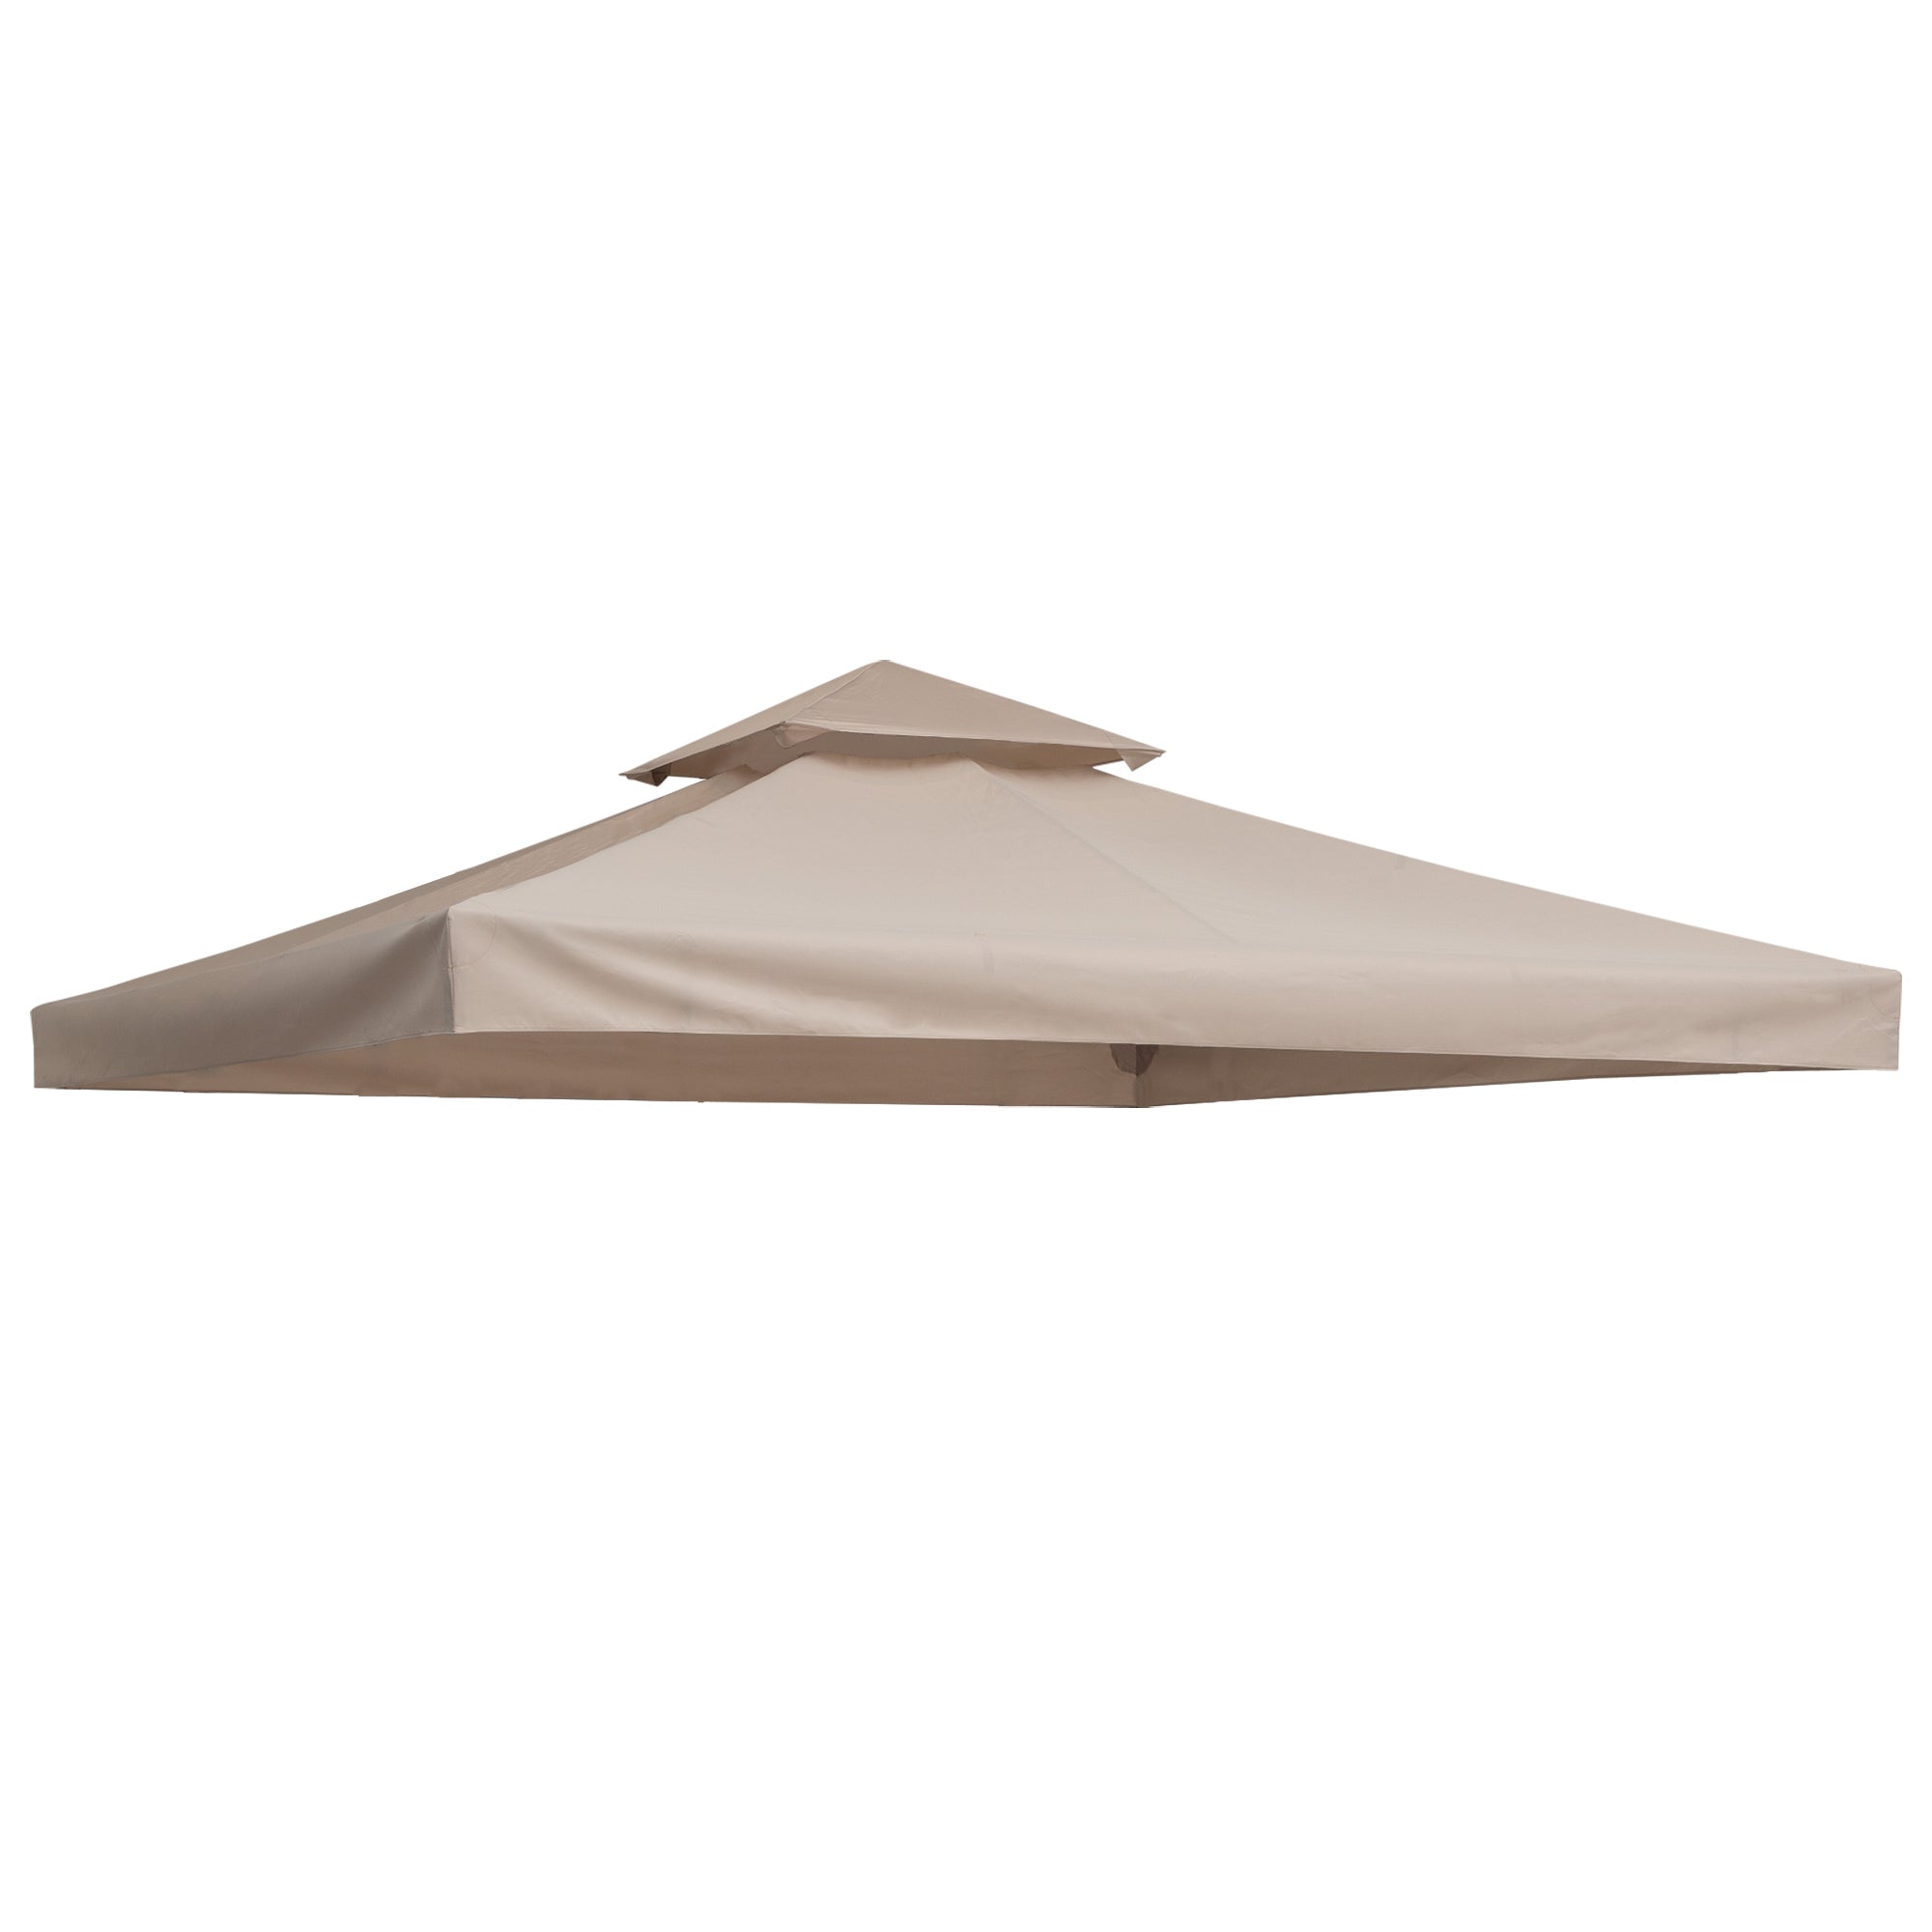 Outsunny 3(m) 2 Tier Garden Gazebo Top Cover Replacement Canopy Roof Deep Beige  | TJ Hughes